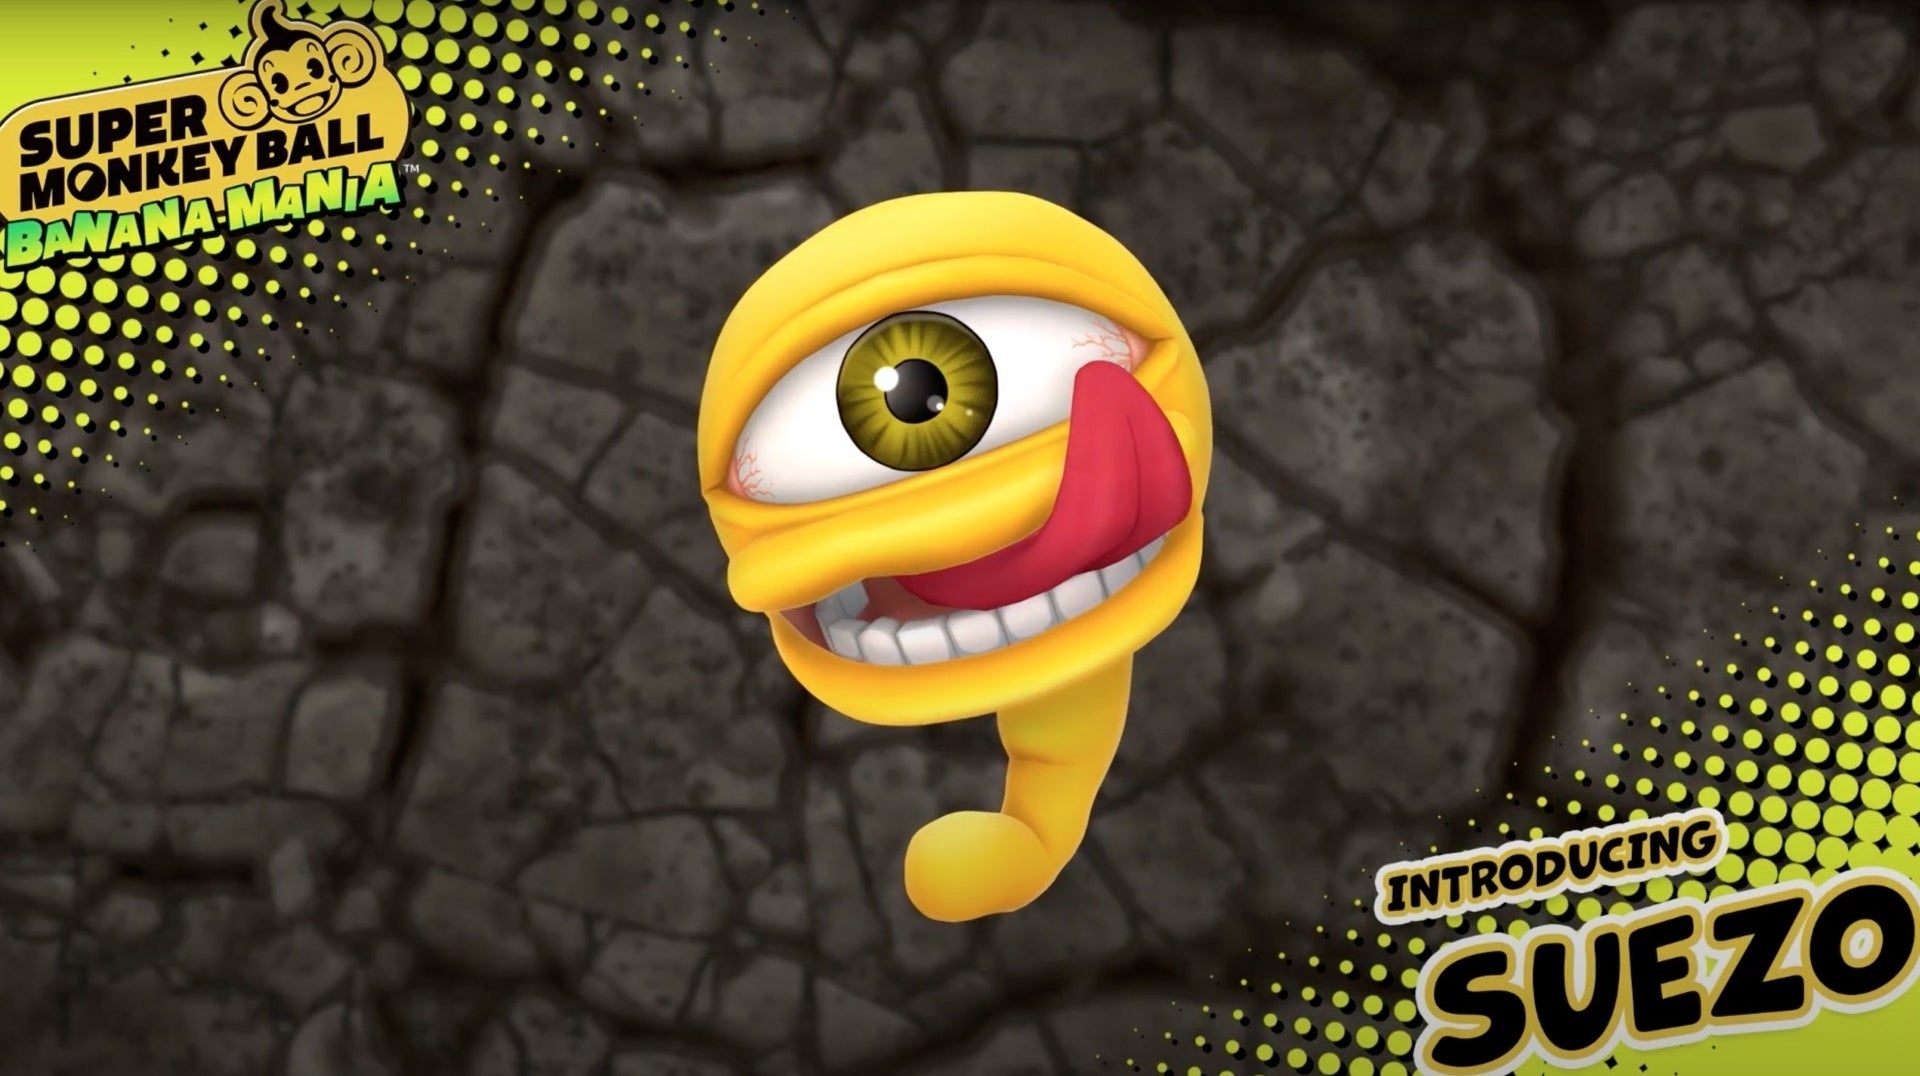 Monster Rancher's Suezo is also paid DLC for Super Monkey Ball: Banana  Mania 